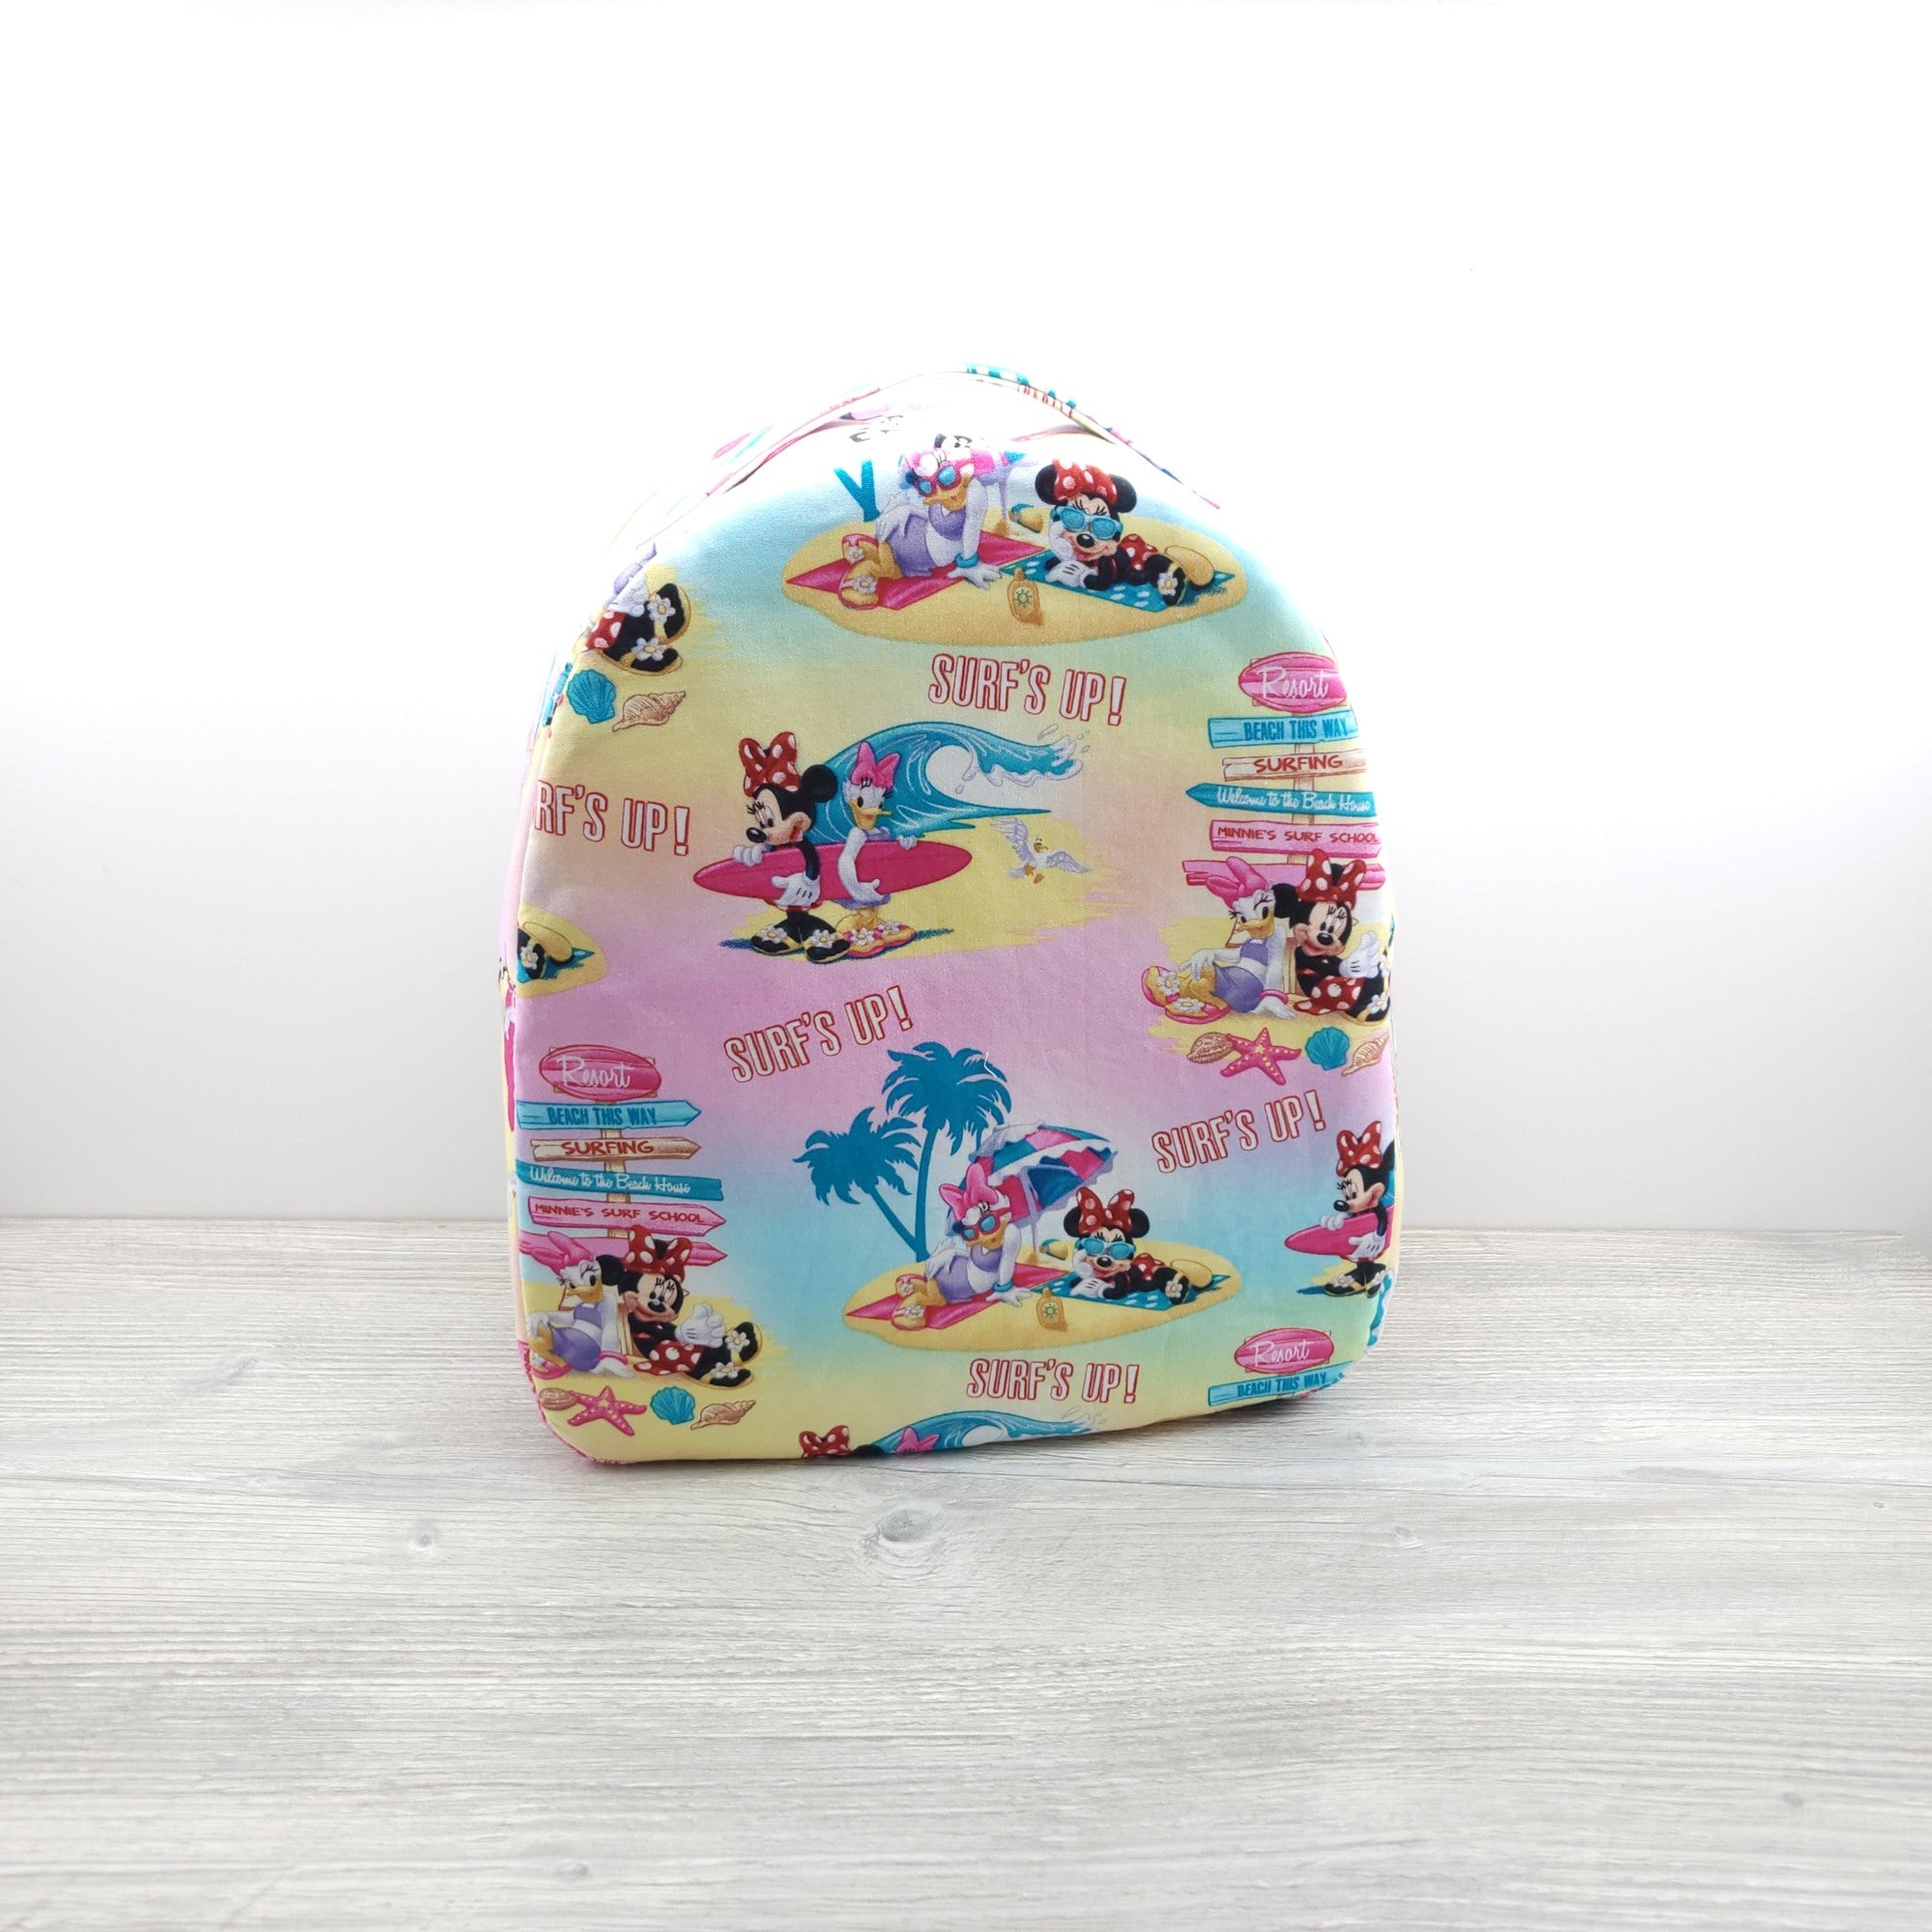 Minnie mouse inspired mini backpack.